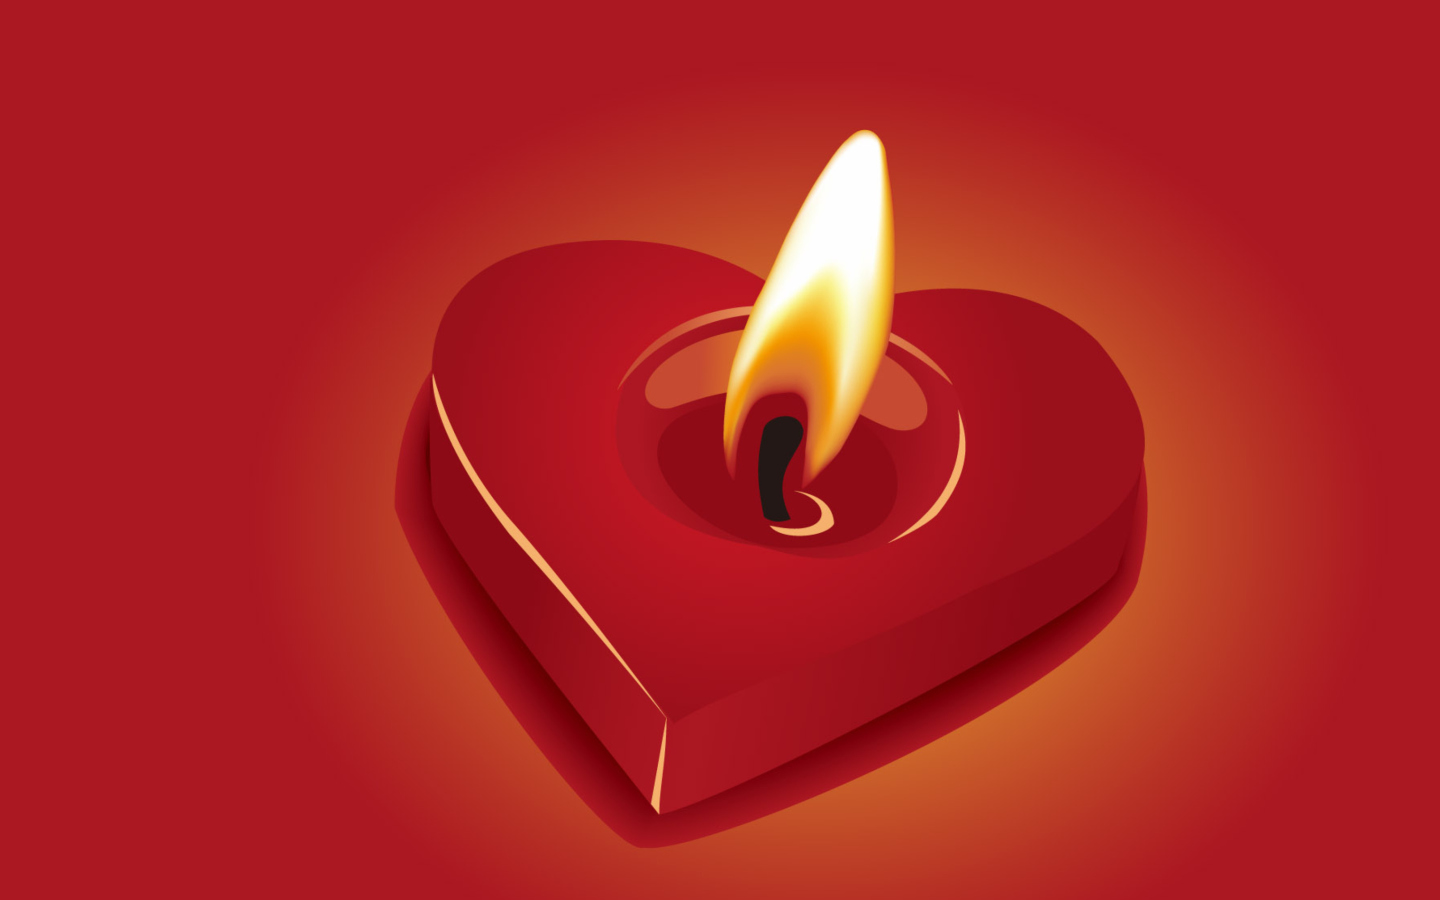 Heart Shaped Candle wallpaper 1440x900